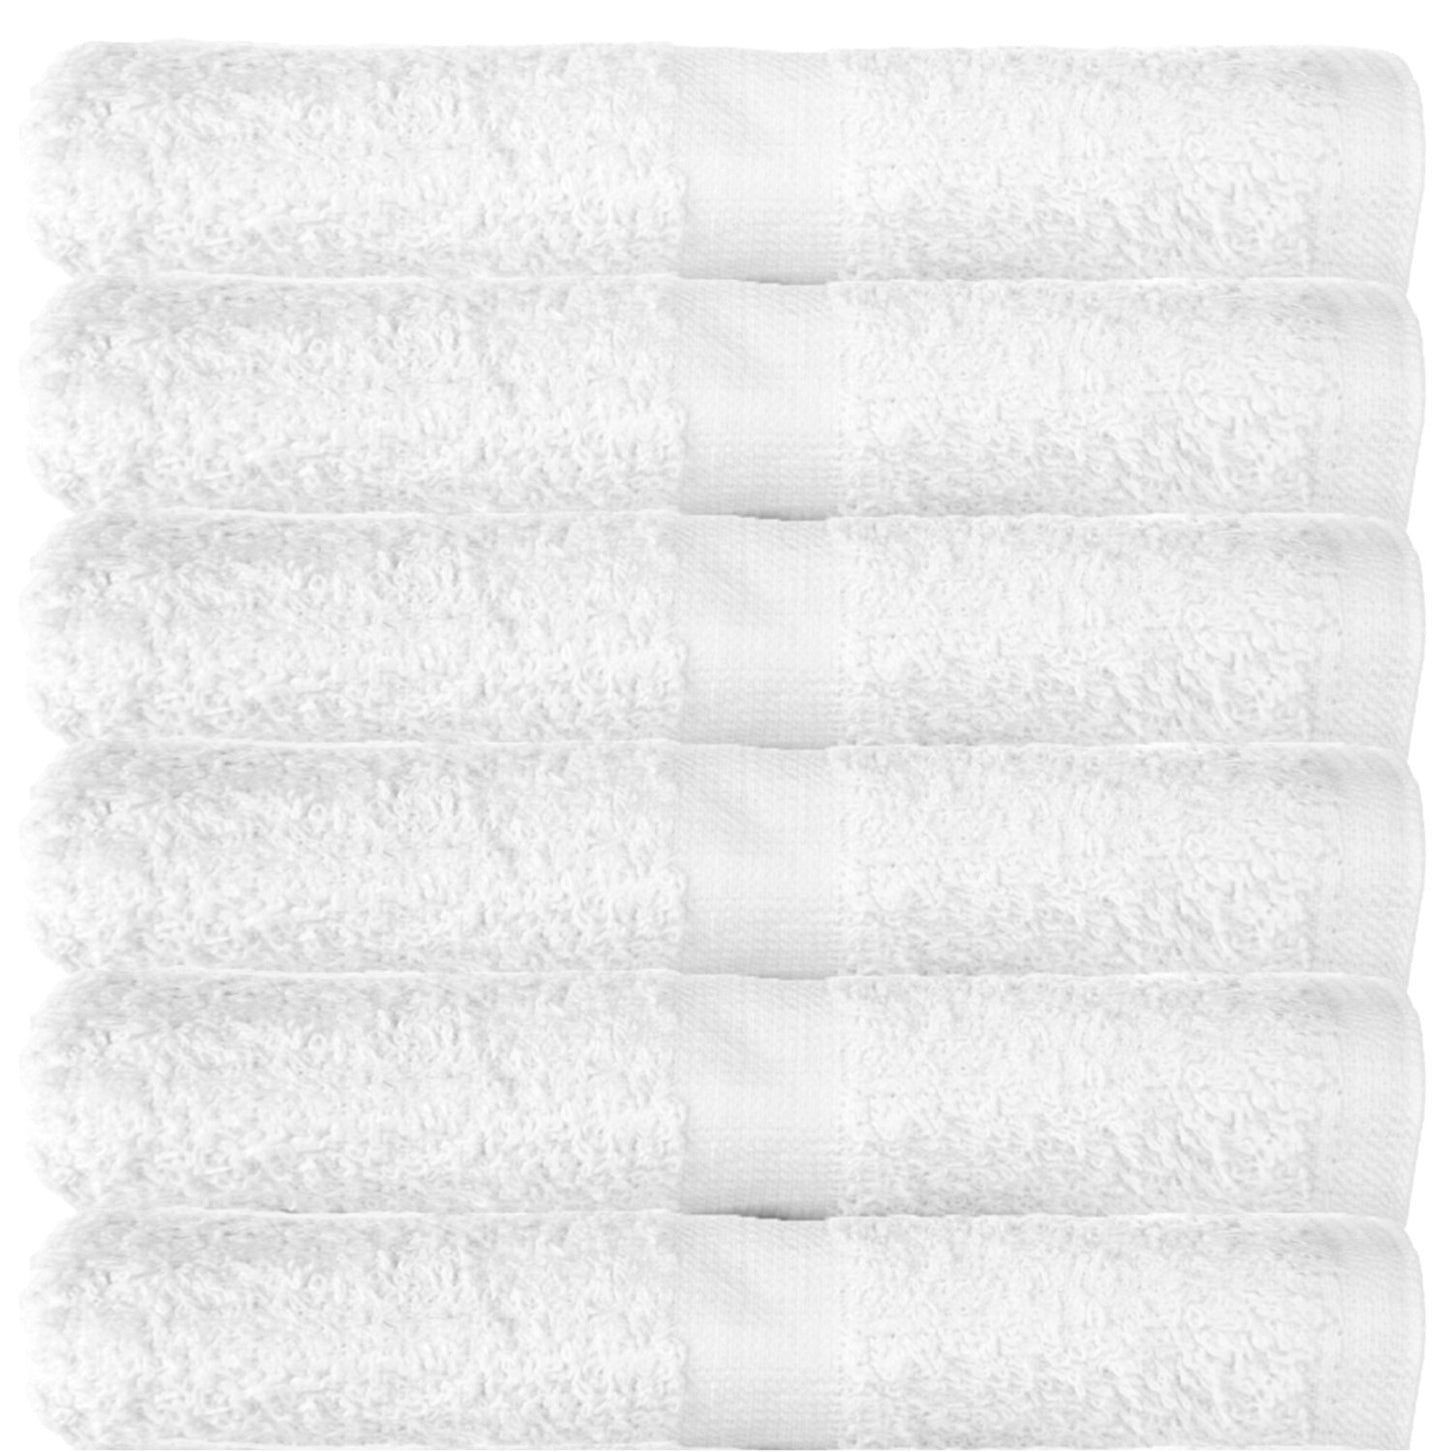 Wealuxe Cotton Hand Towels - 12 Pack of White Towels